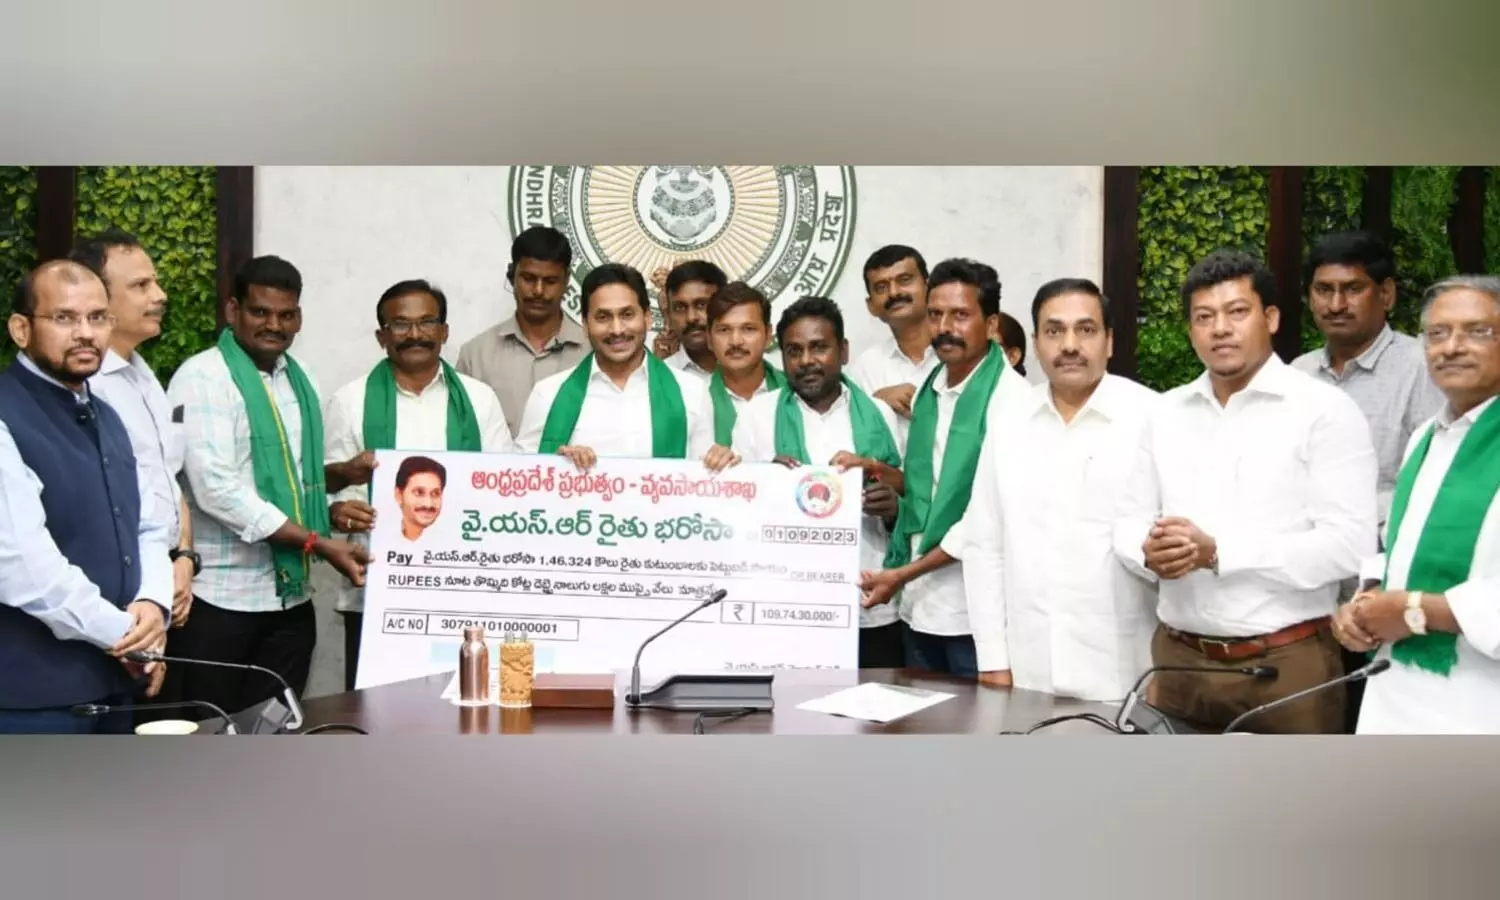 YS Jagan releases Rs 109 crore for Rythu Bharosa to 1.46 lakh tenant farmers